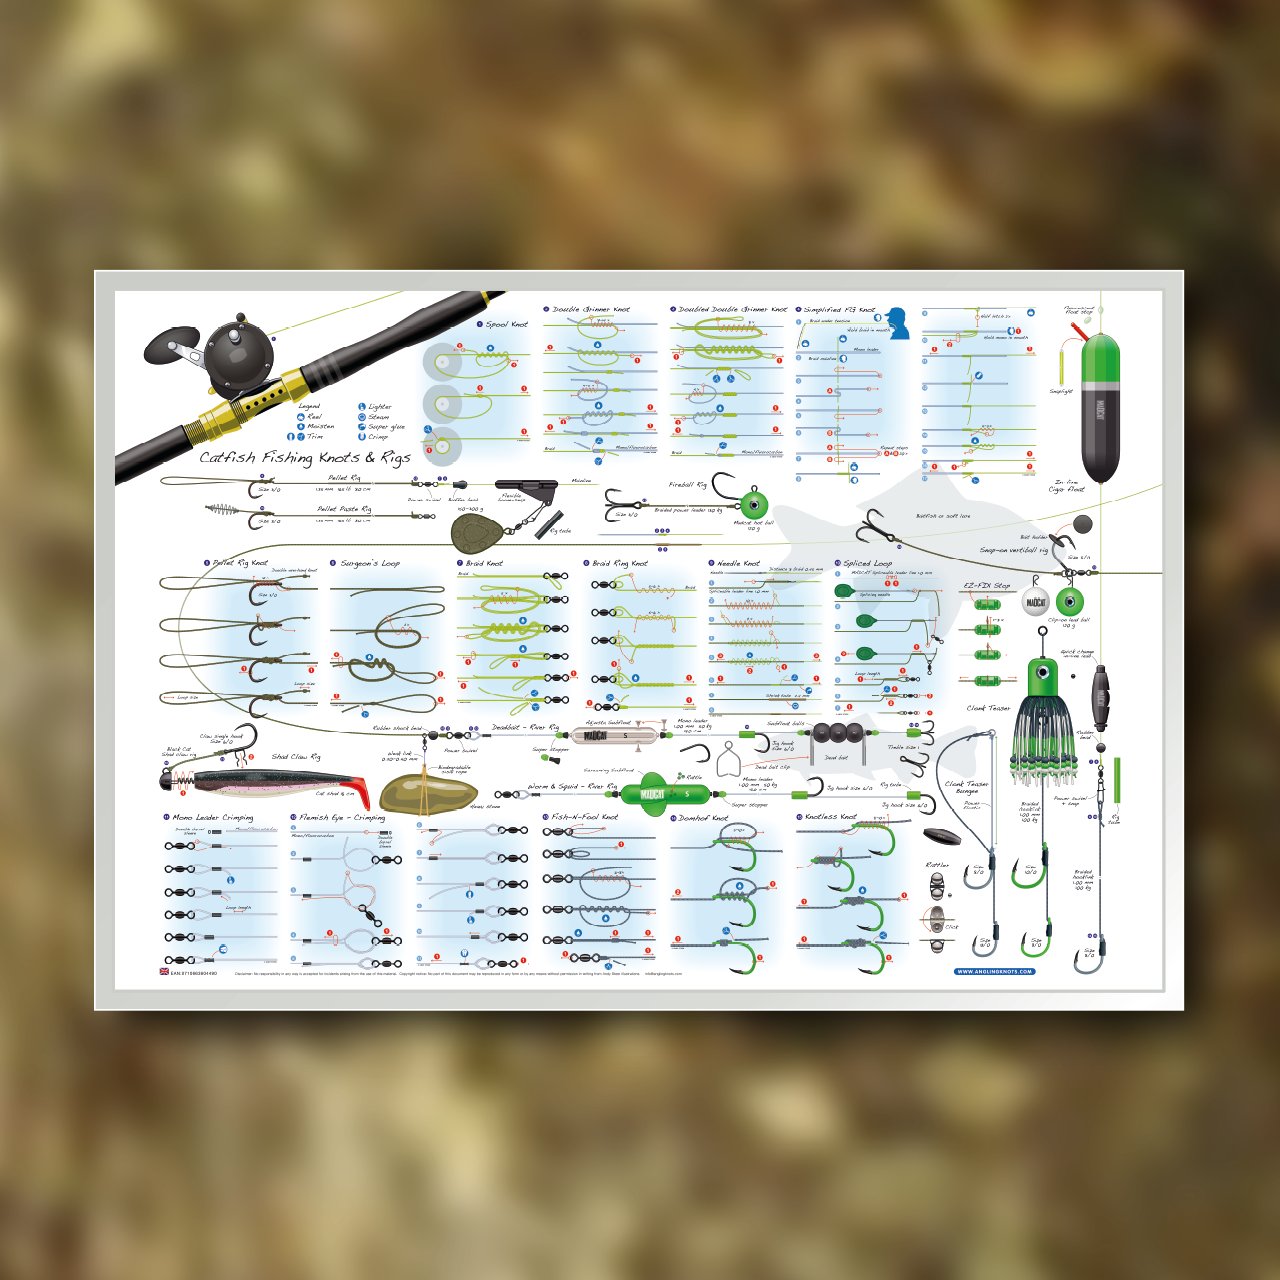 Andy Steer on X: The NEW Catfish Fishing Knots & Rigs Poster is